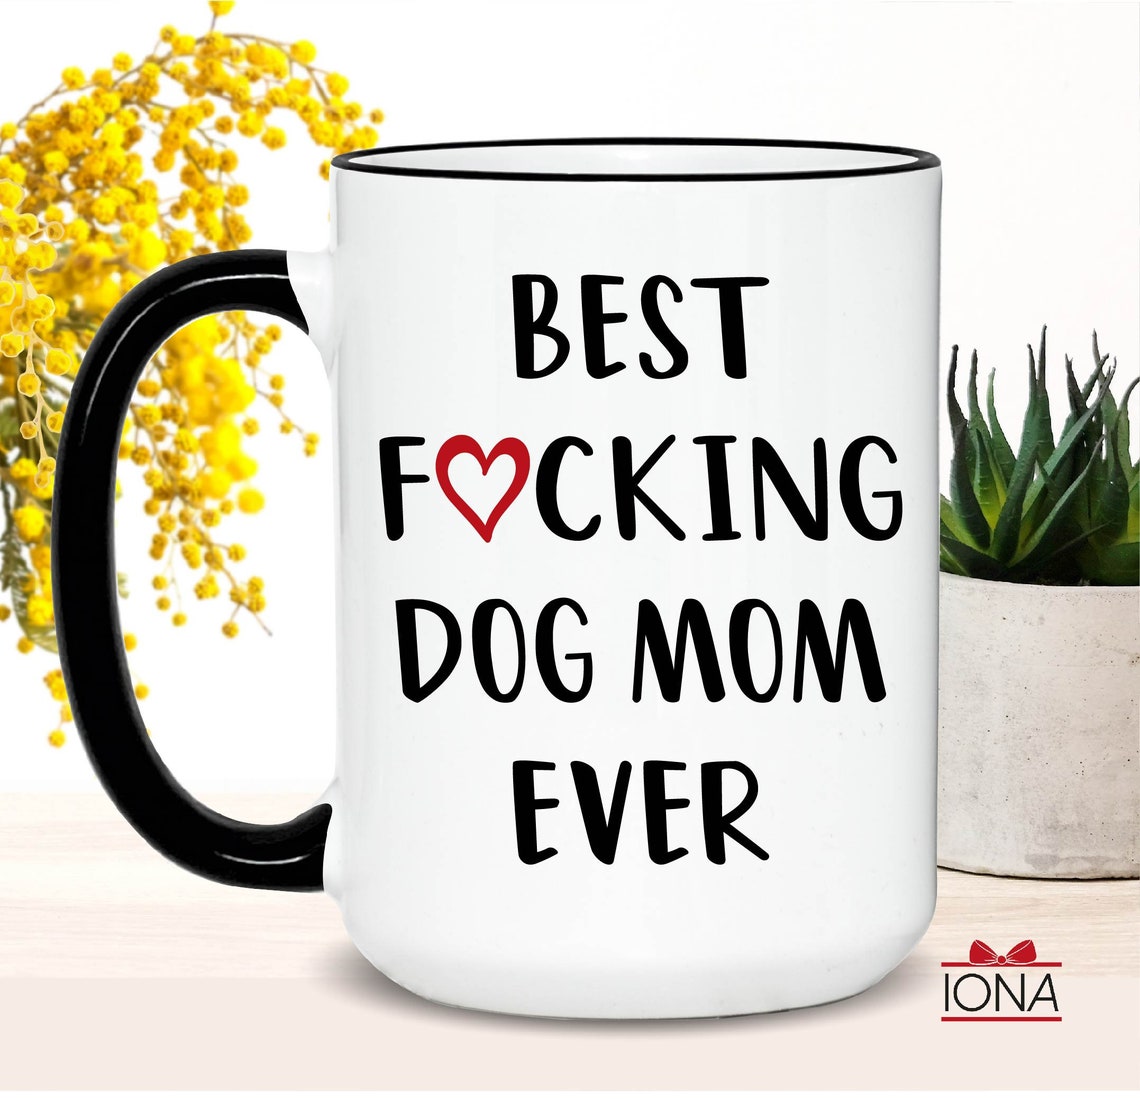 Funny Dog Mom Coffee Mug - Best Dog Mom Mother’s Day Gift for Women - Funny Morning Coffee Cup